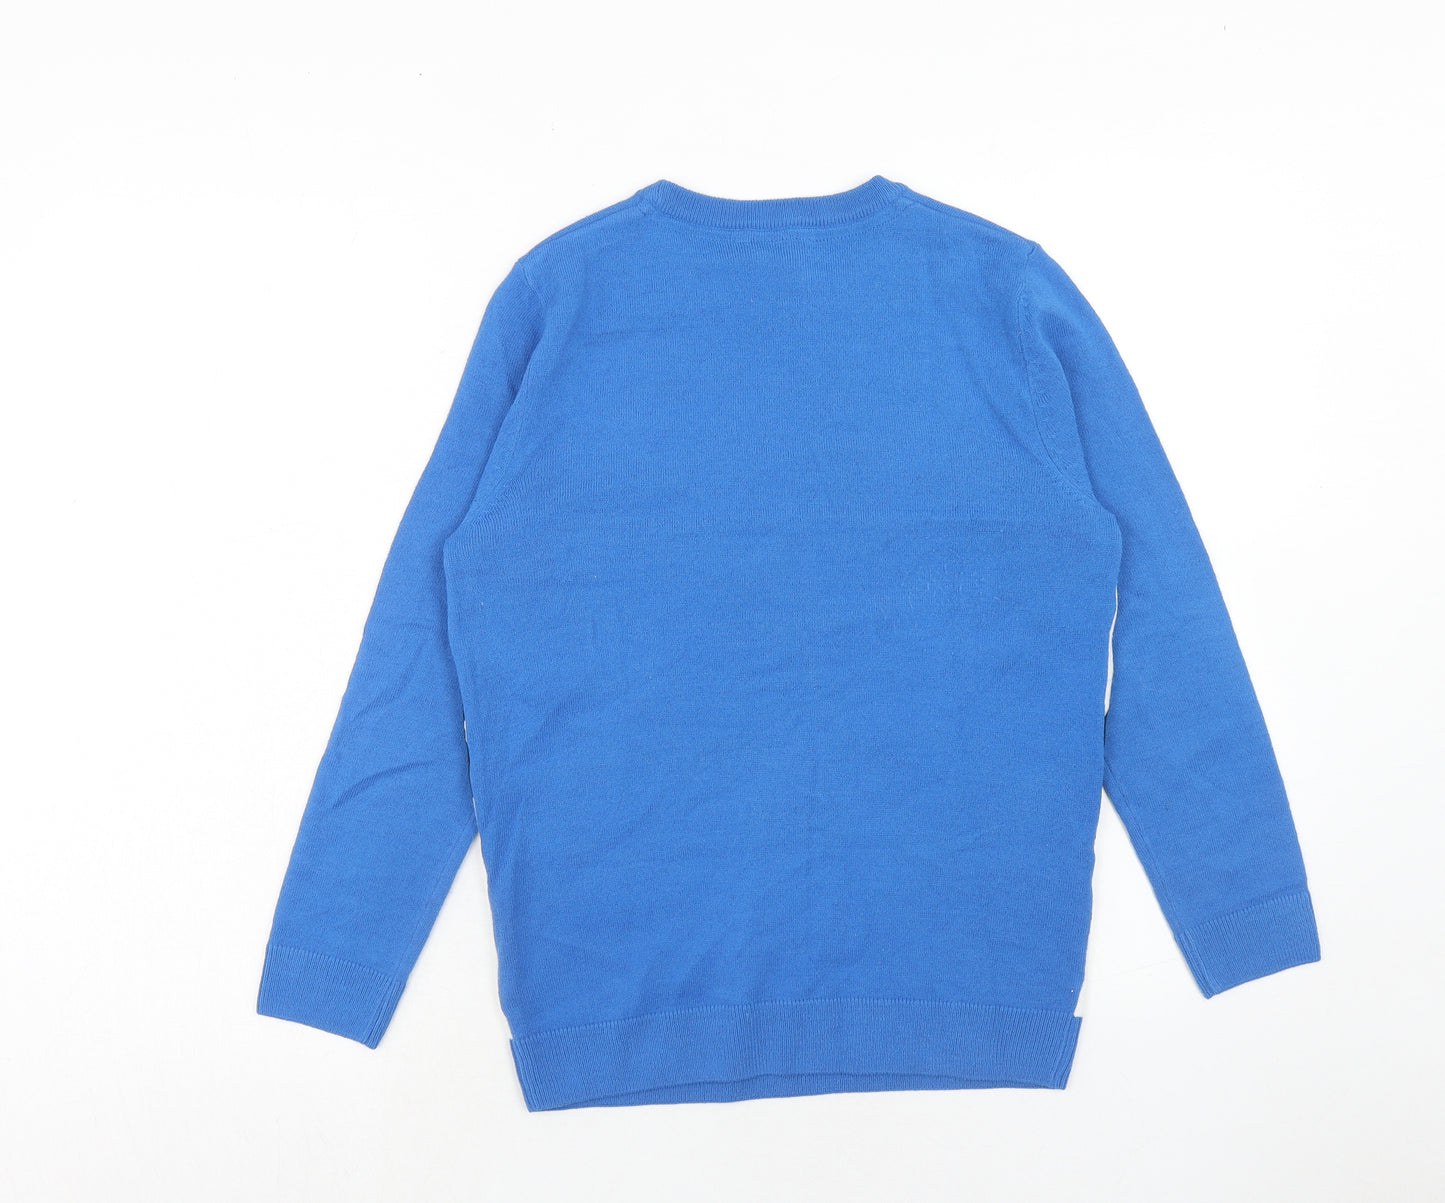 Marks and Spencer Boys Blue Round Neck Acrylic Pullover Jumper Size 12-13 Years Pullover - Penguin Skiing